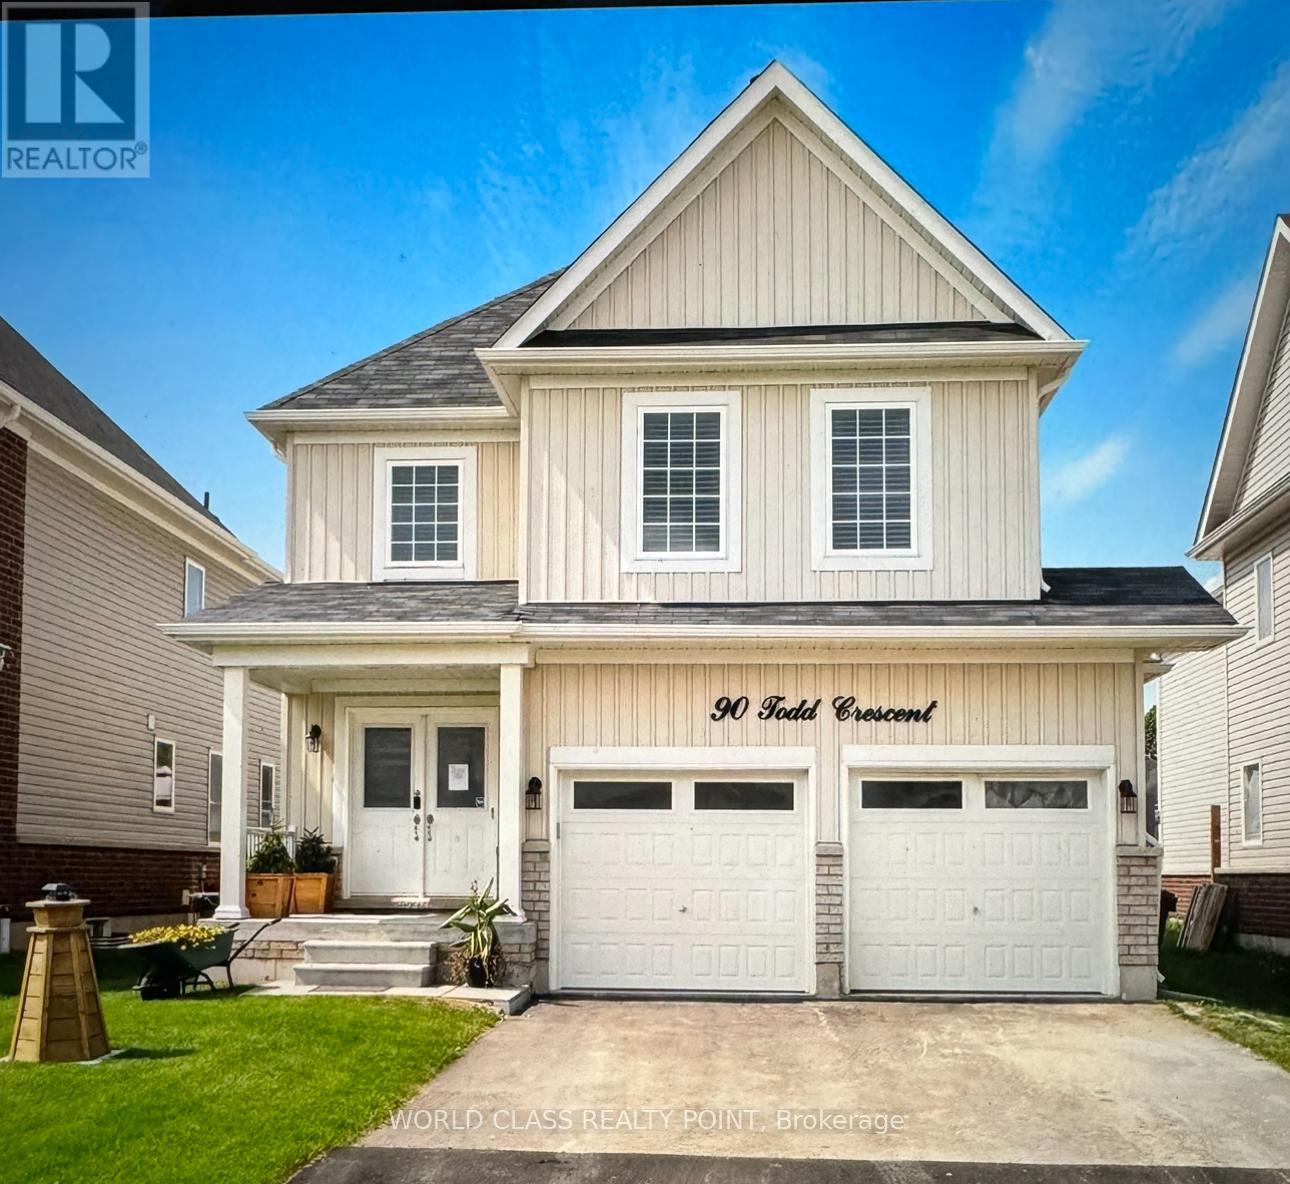 90 Todd Crescent, Southgate, 5 Bedrooms Bedrooms, ,4 BathroomsBathrooms,Single Family,For Sale,Todd,X8088936